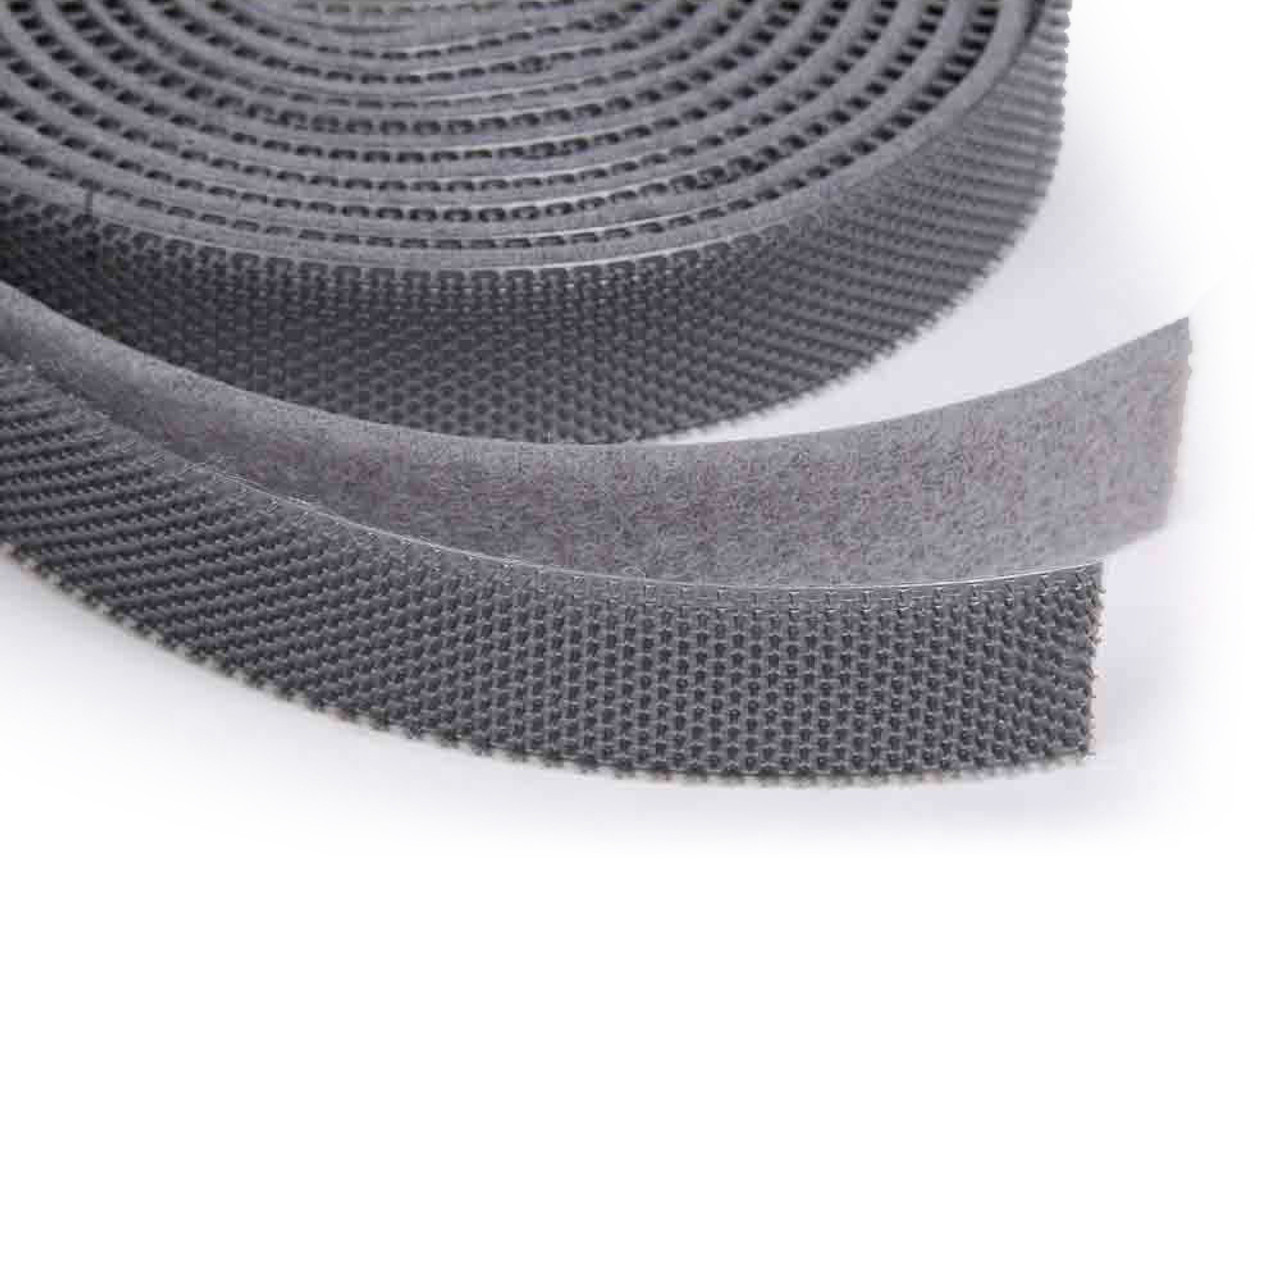 VELCRO ® Brand Extreme On A Roll / Velcro Fasteners